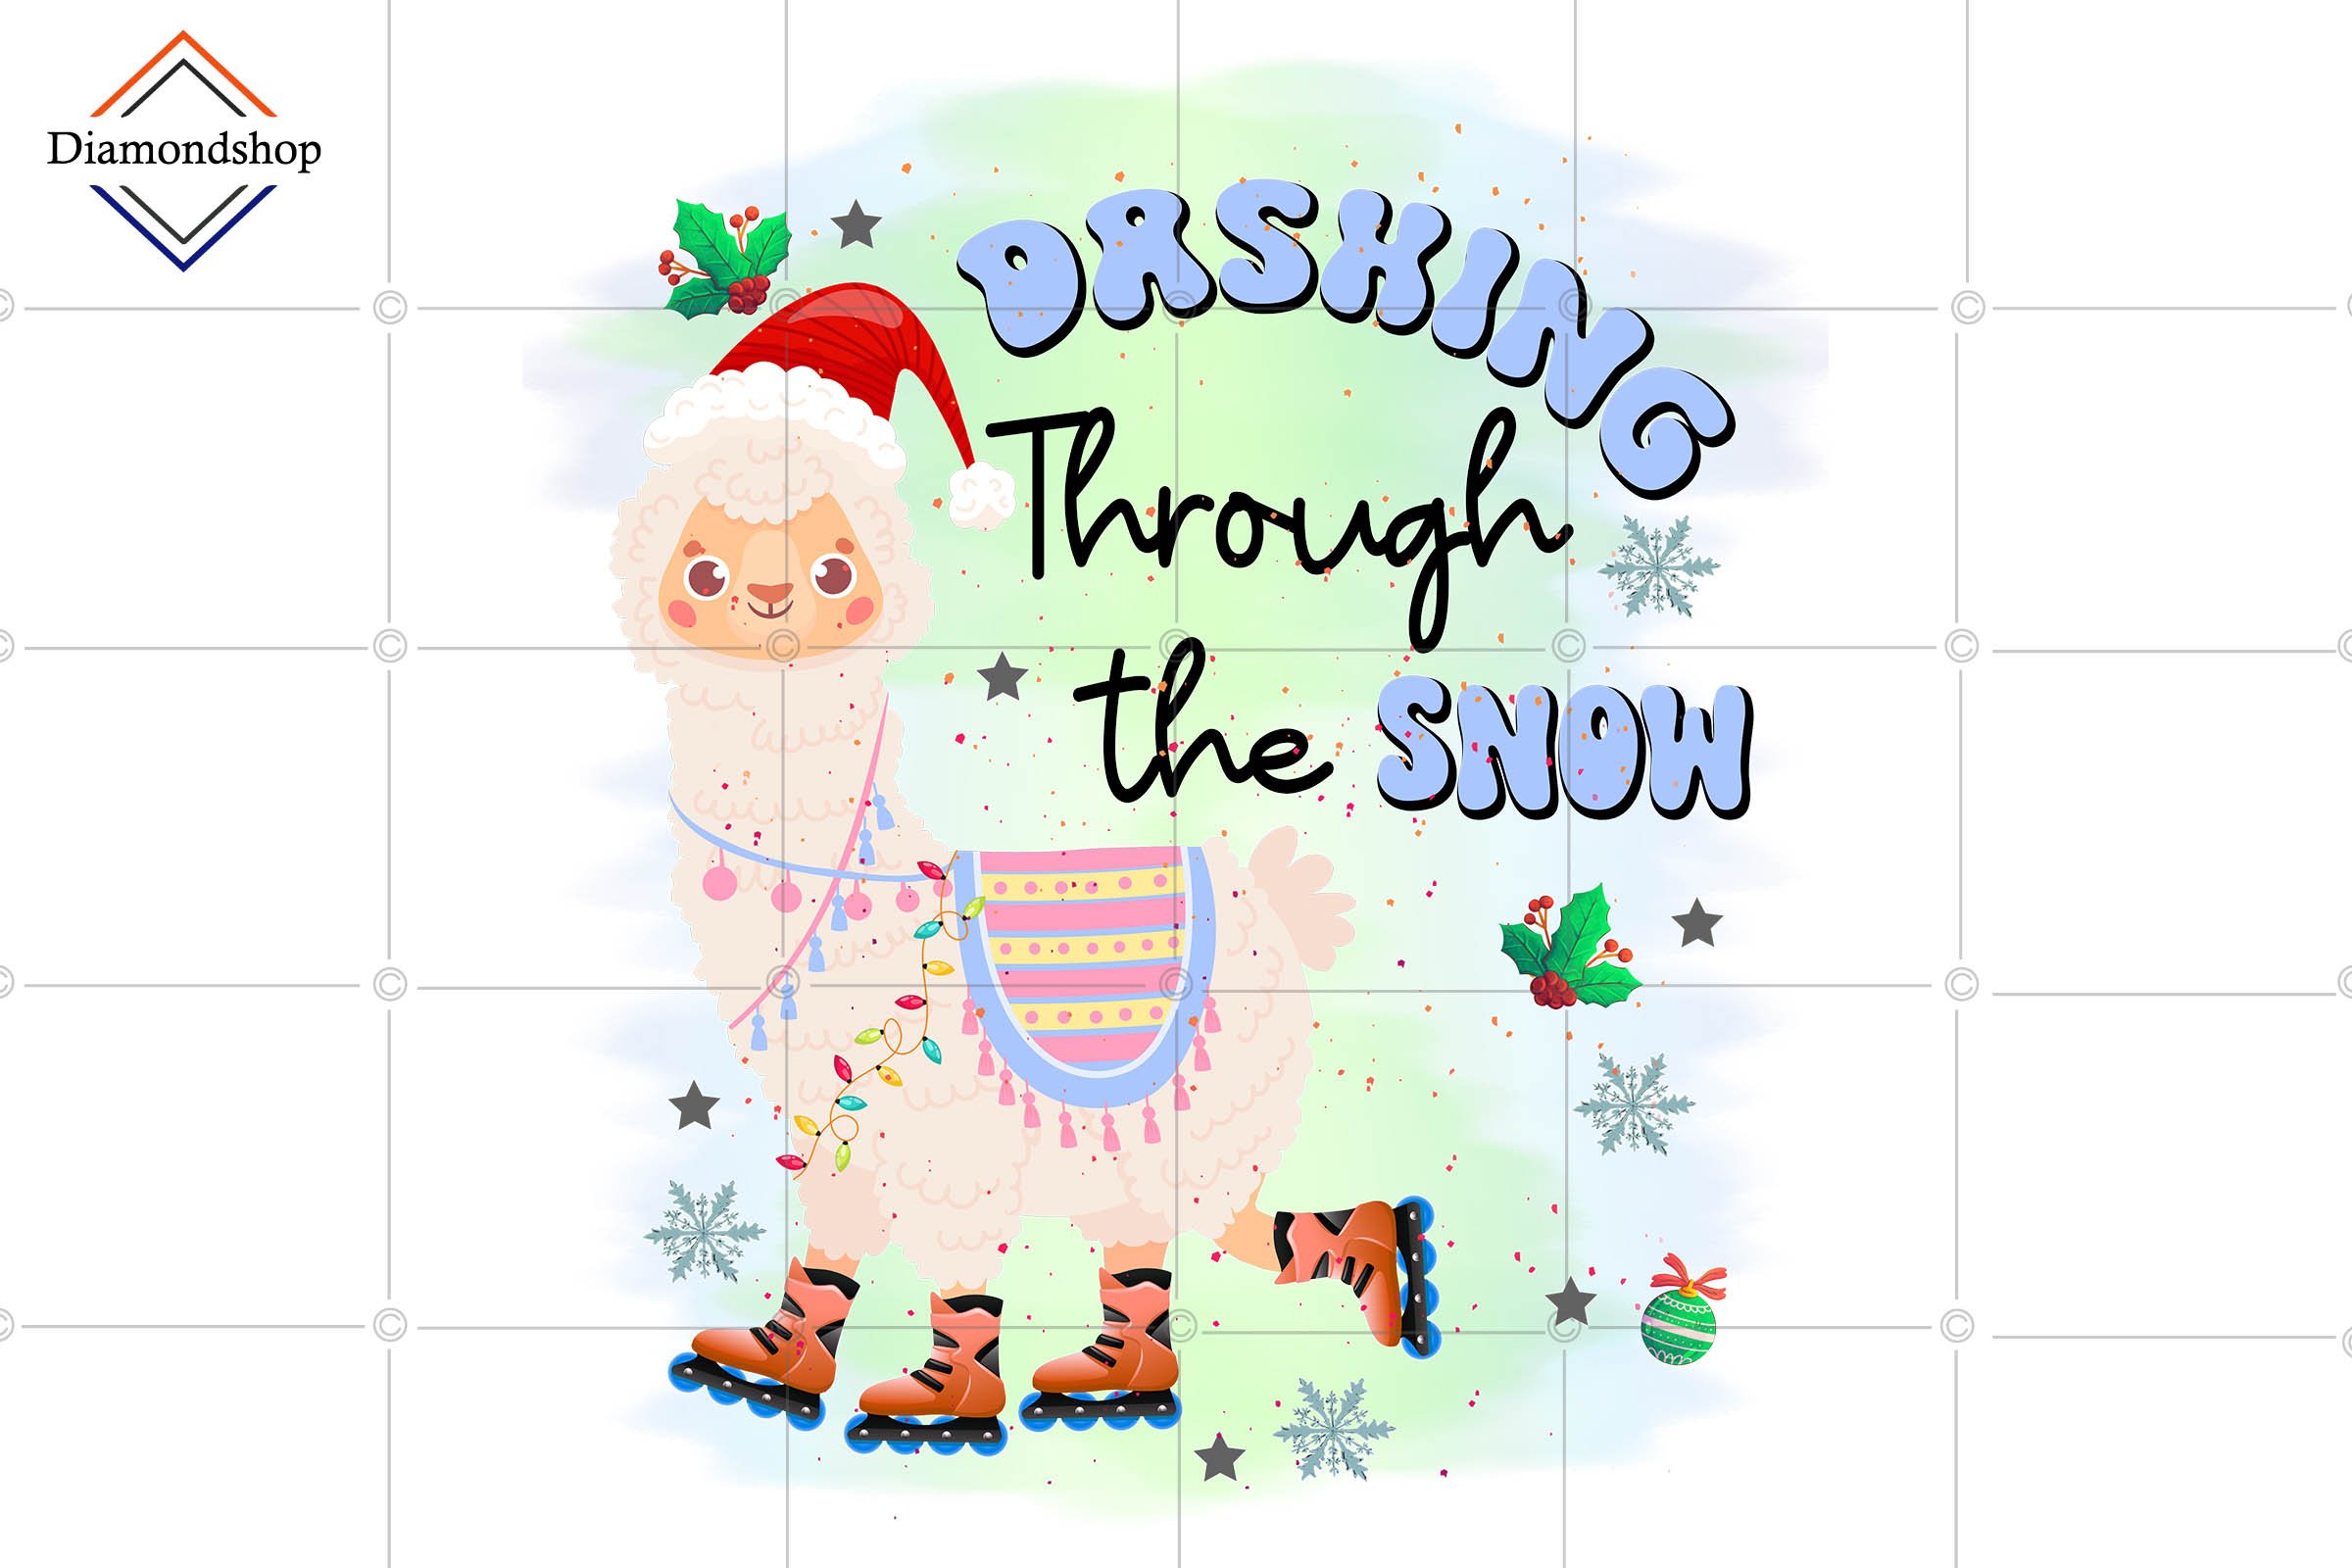 Dashing Through the Snow Sublimation cover image.